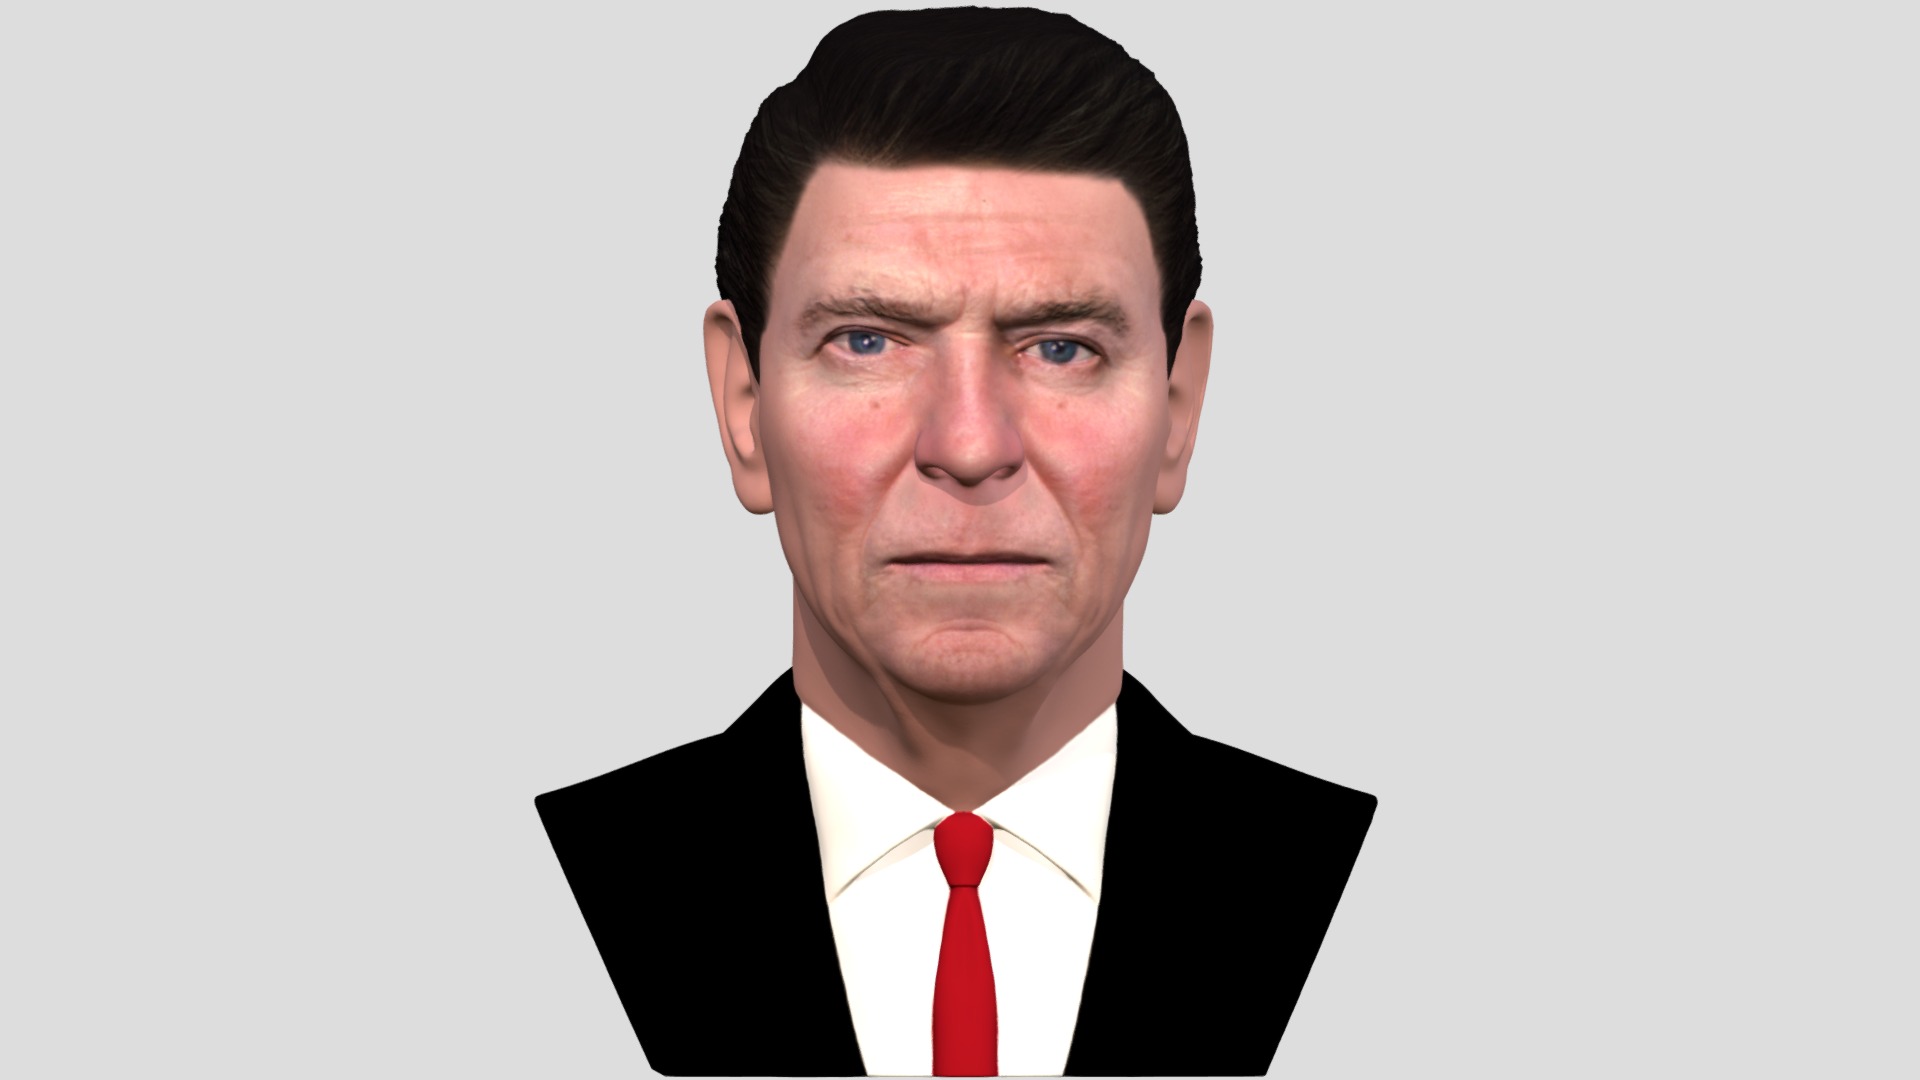 3D model Ronald Reagan bust for full color 3D printing - This is a 3D model of the Ronald Reagan bust for full color 3D printing. The 3D model is about a man in a suit.